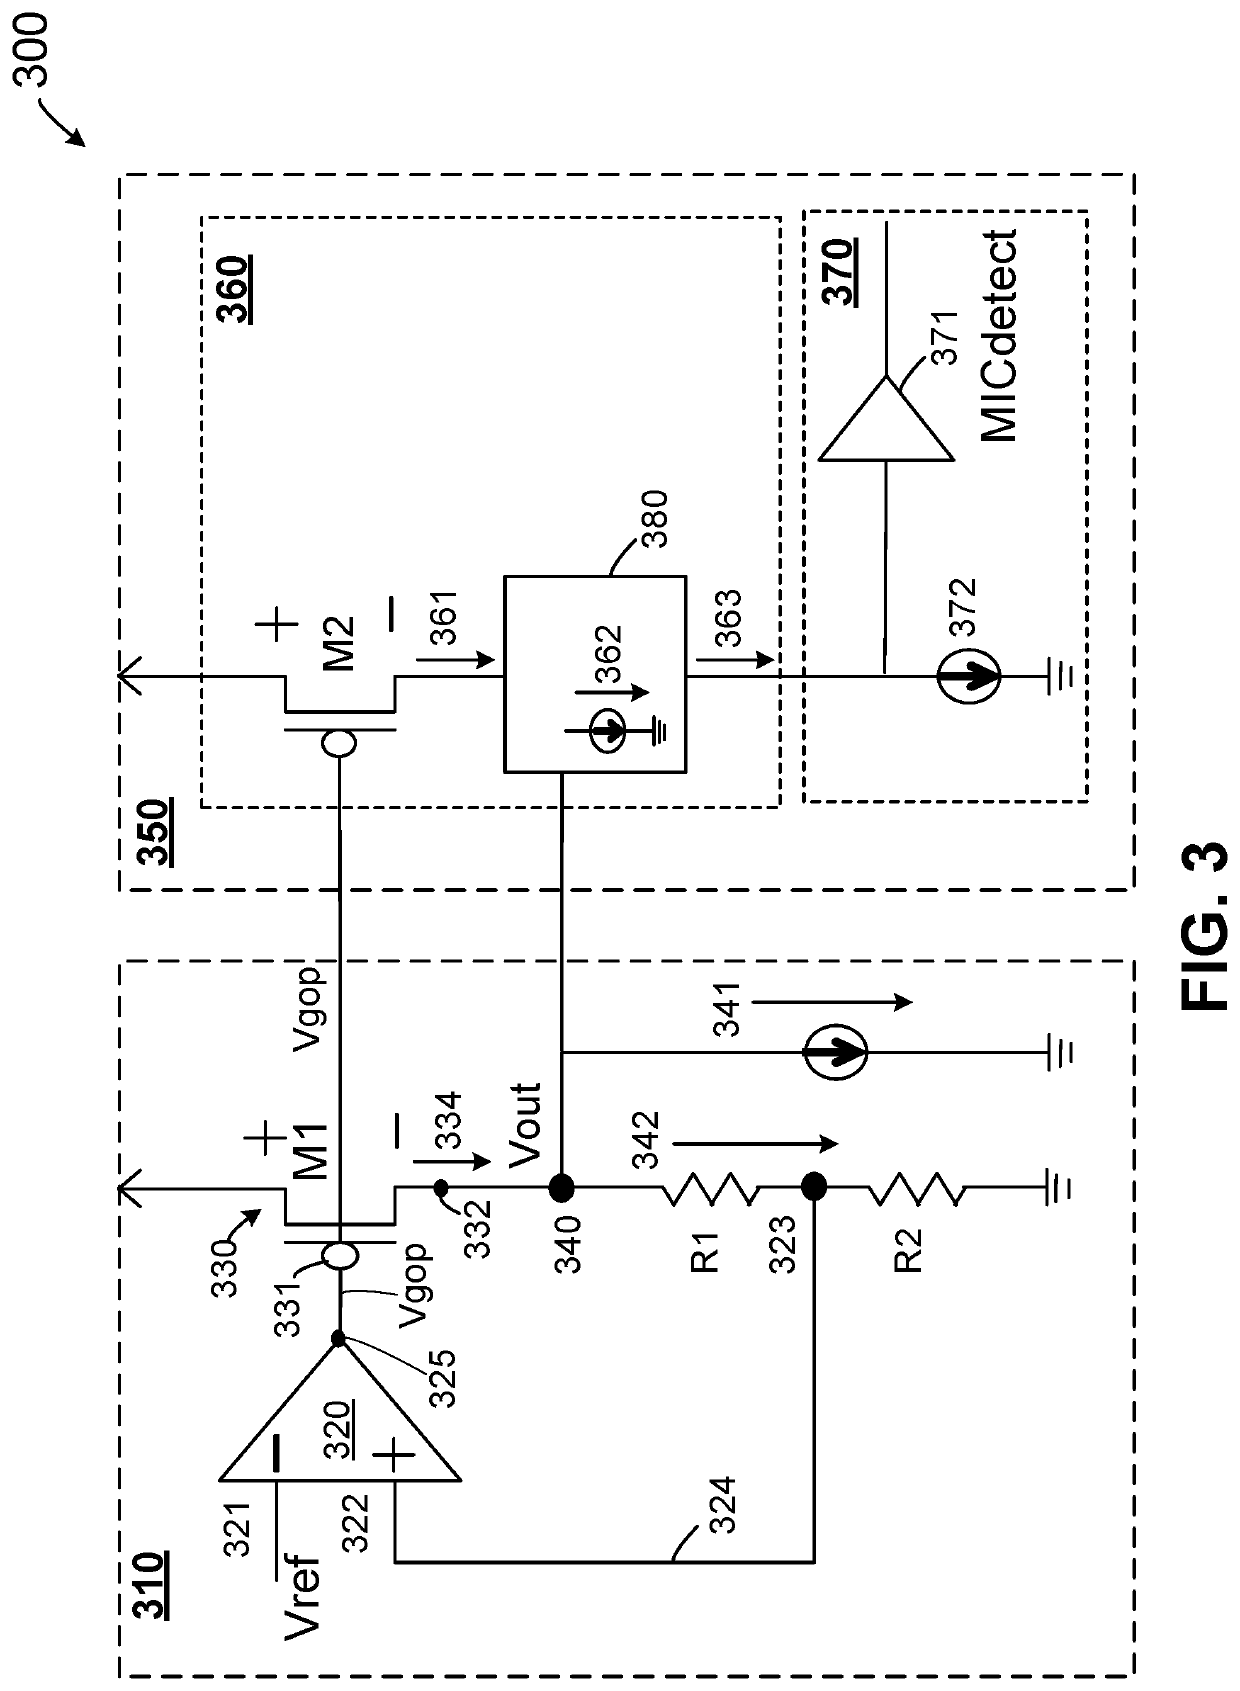 Audio microphone detection using auto-tracking current comparator